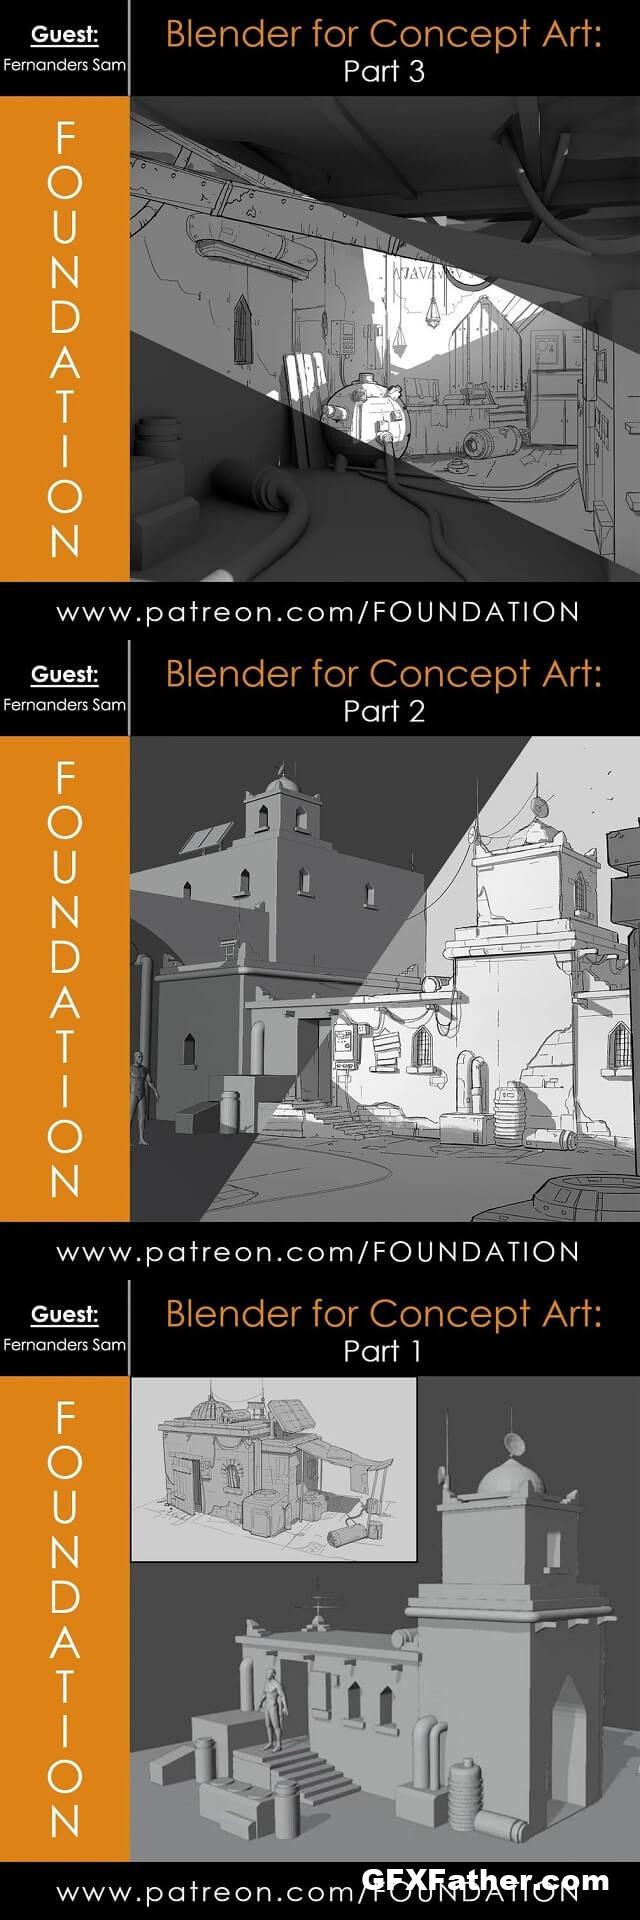 Foundation Patreon - Blender for Concept Art Part 1, 2, 3 Free Download